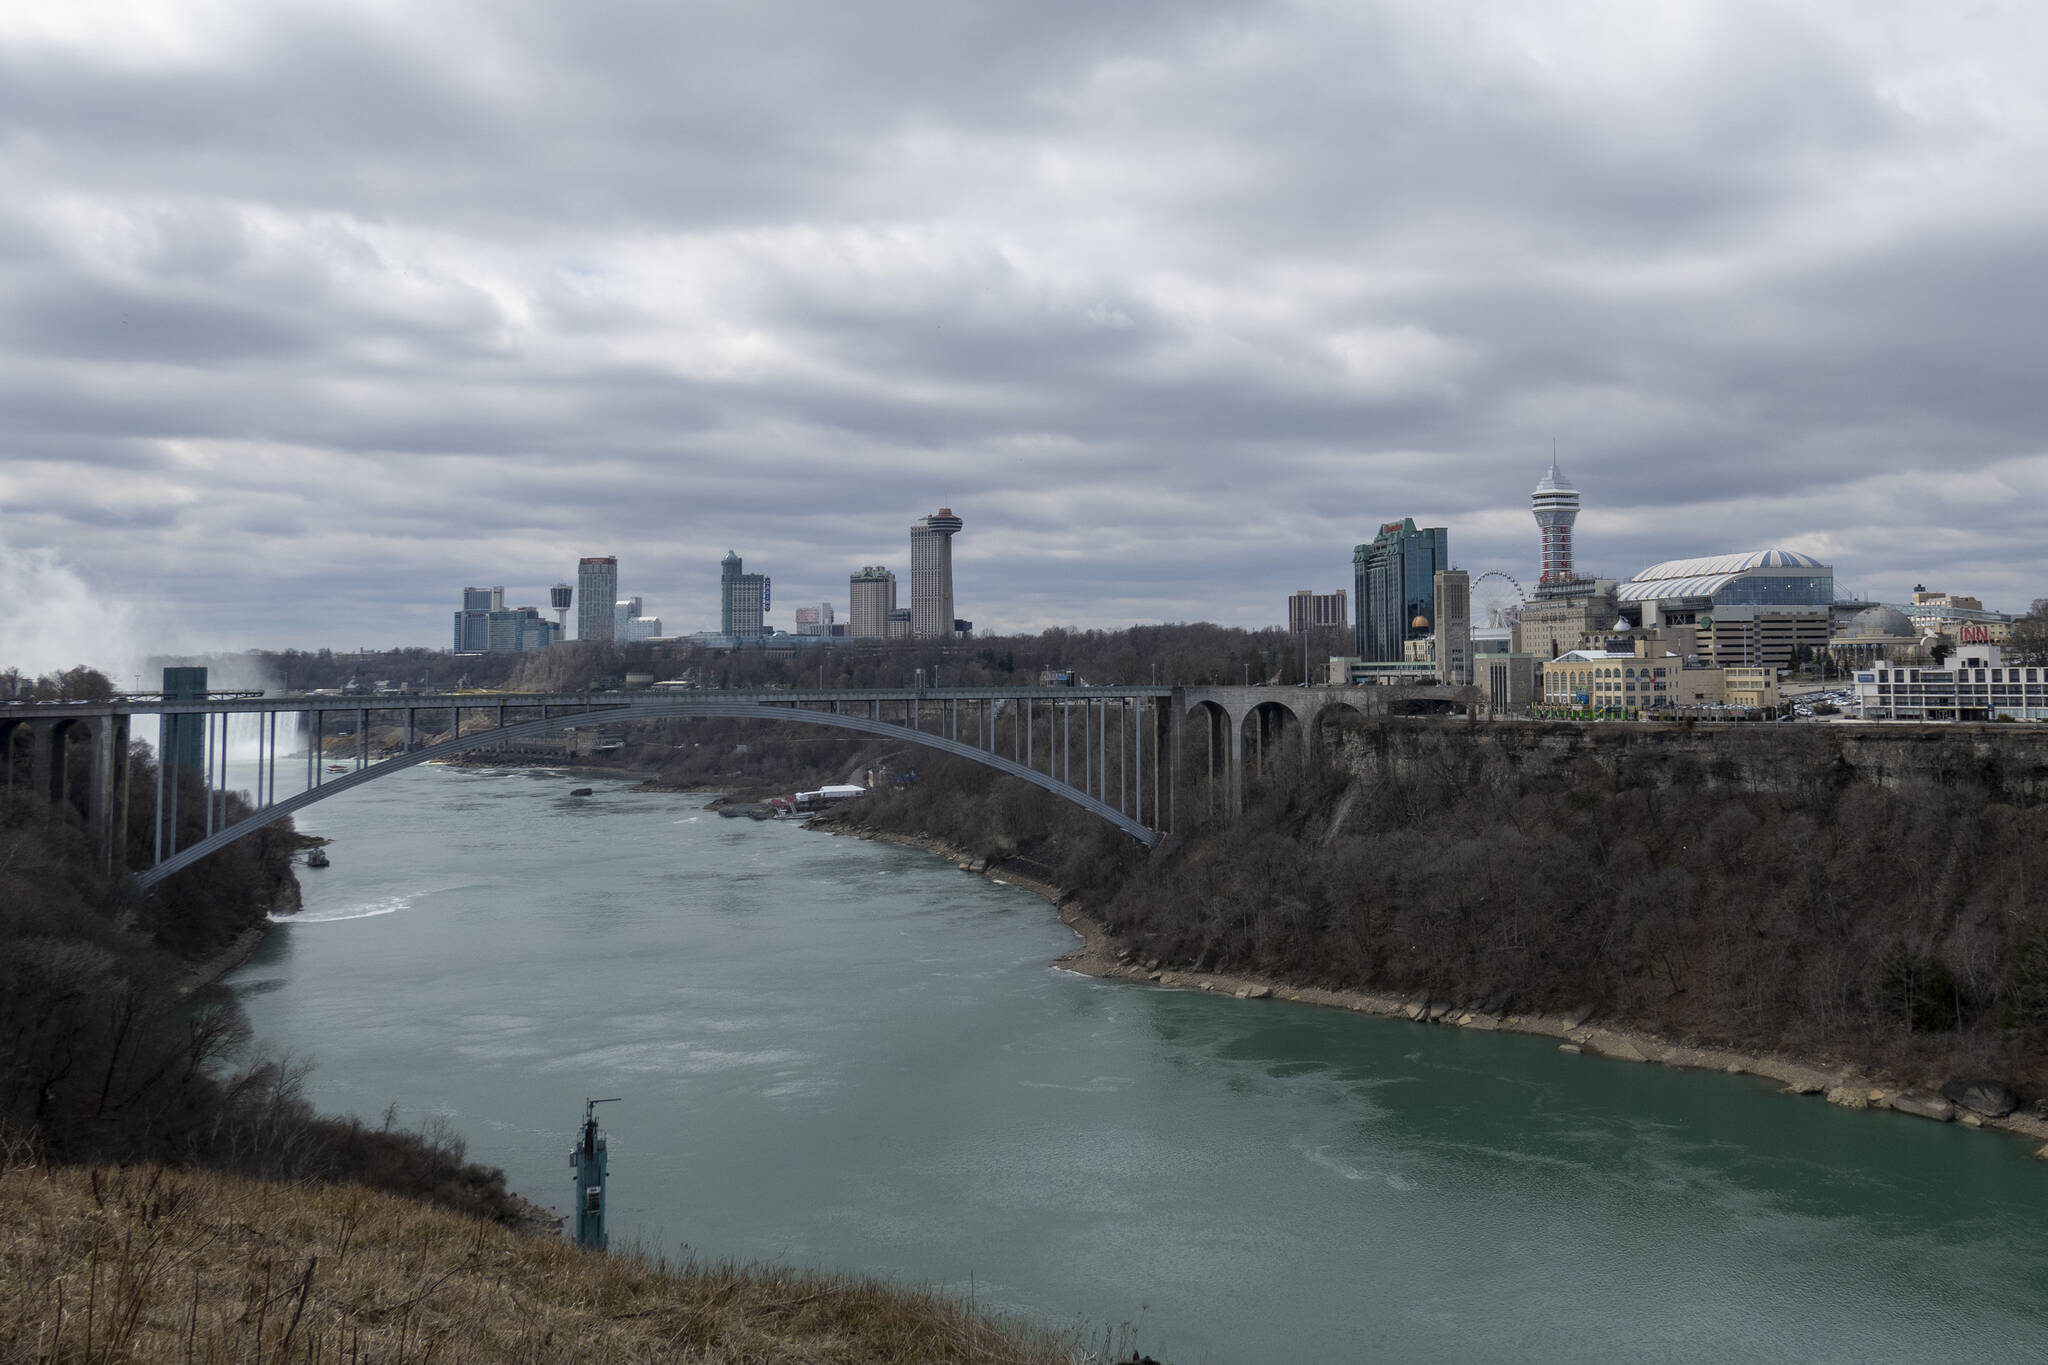 A view of Niagara Falls, Ont. is shown on Friday, March 29, 2024 in a photo taken in Niagara Falls, N.Y. Ontario’s Niagara Region has declared a state of emergency as it readies to welcome up to a million visitors for the solar eclipse in early April.THE CANADIAN PRESS/Carlos Osorio